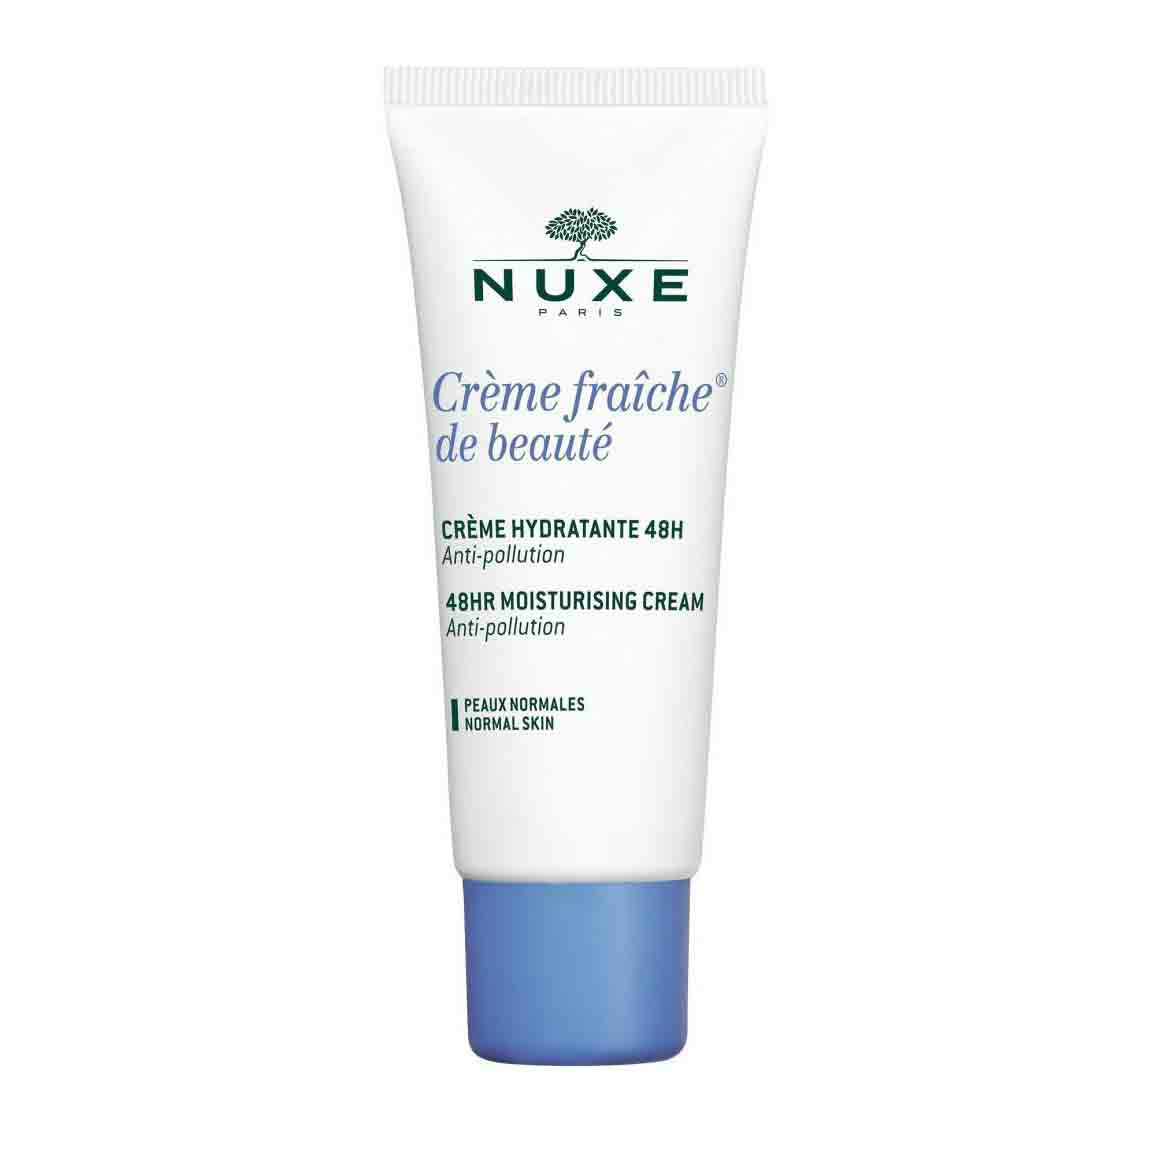 Nuxe Daily Moisturizing Cream for Oily and Combination Skin